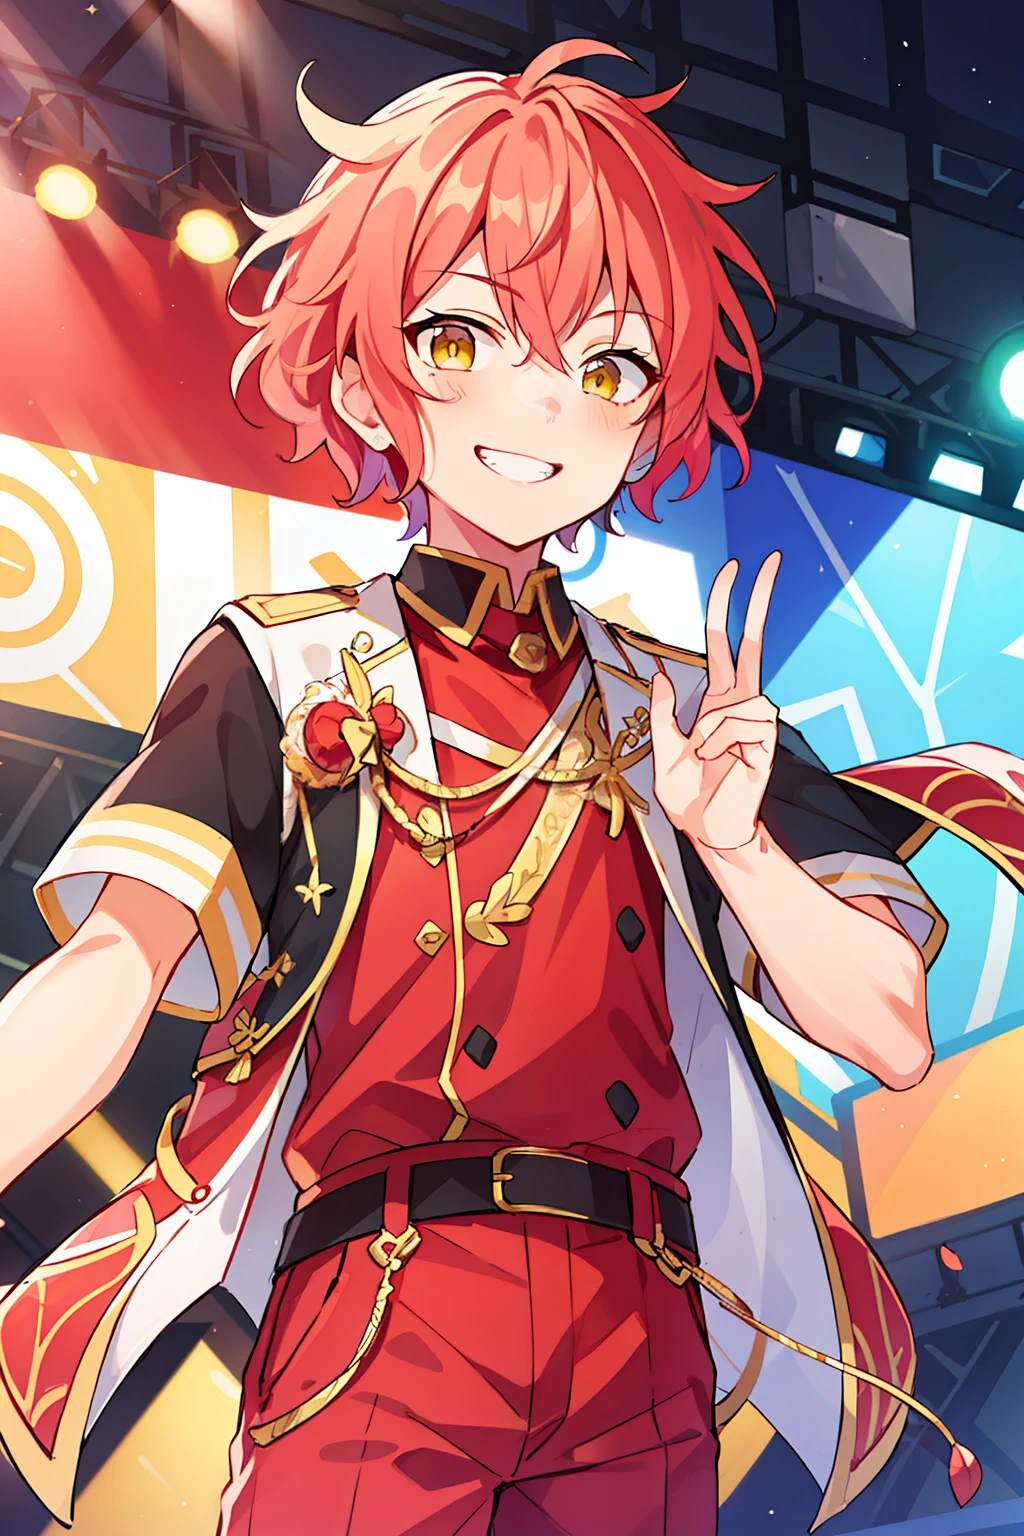 (high-quality, breathtaking),(expressive eyes, perfect face), 1boy, male, solo, short, young boy, curly peach pink hair, yellow eyes, grin, red idol outfit, pants, stage